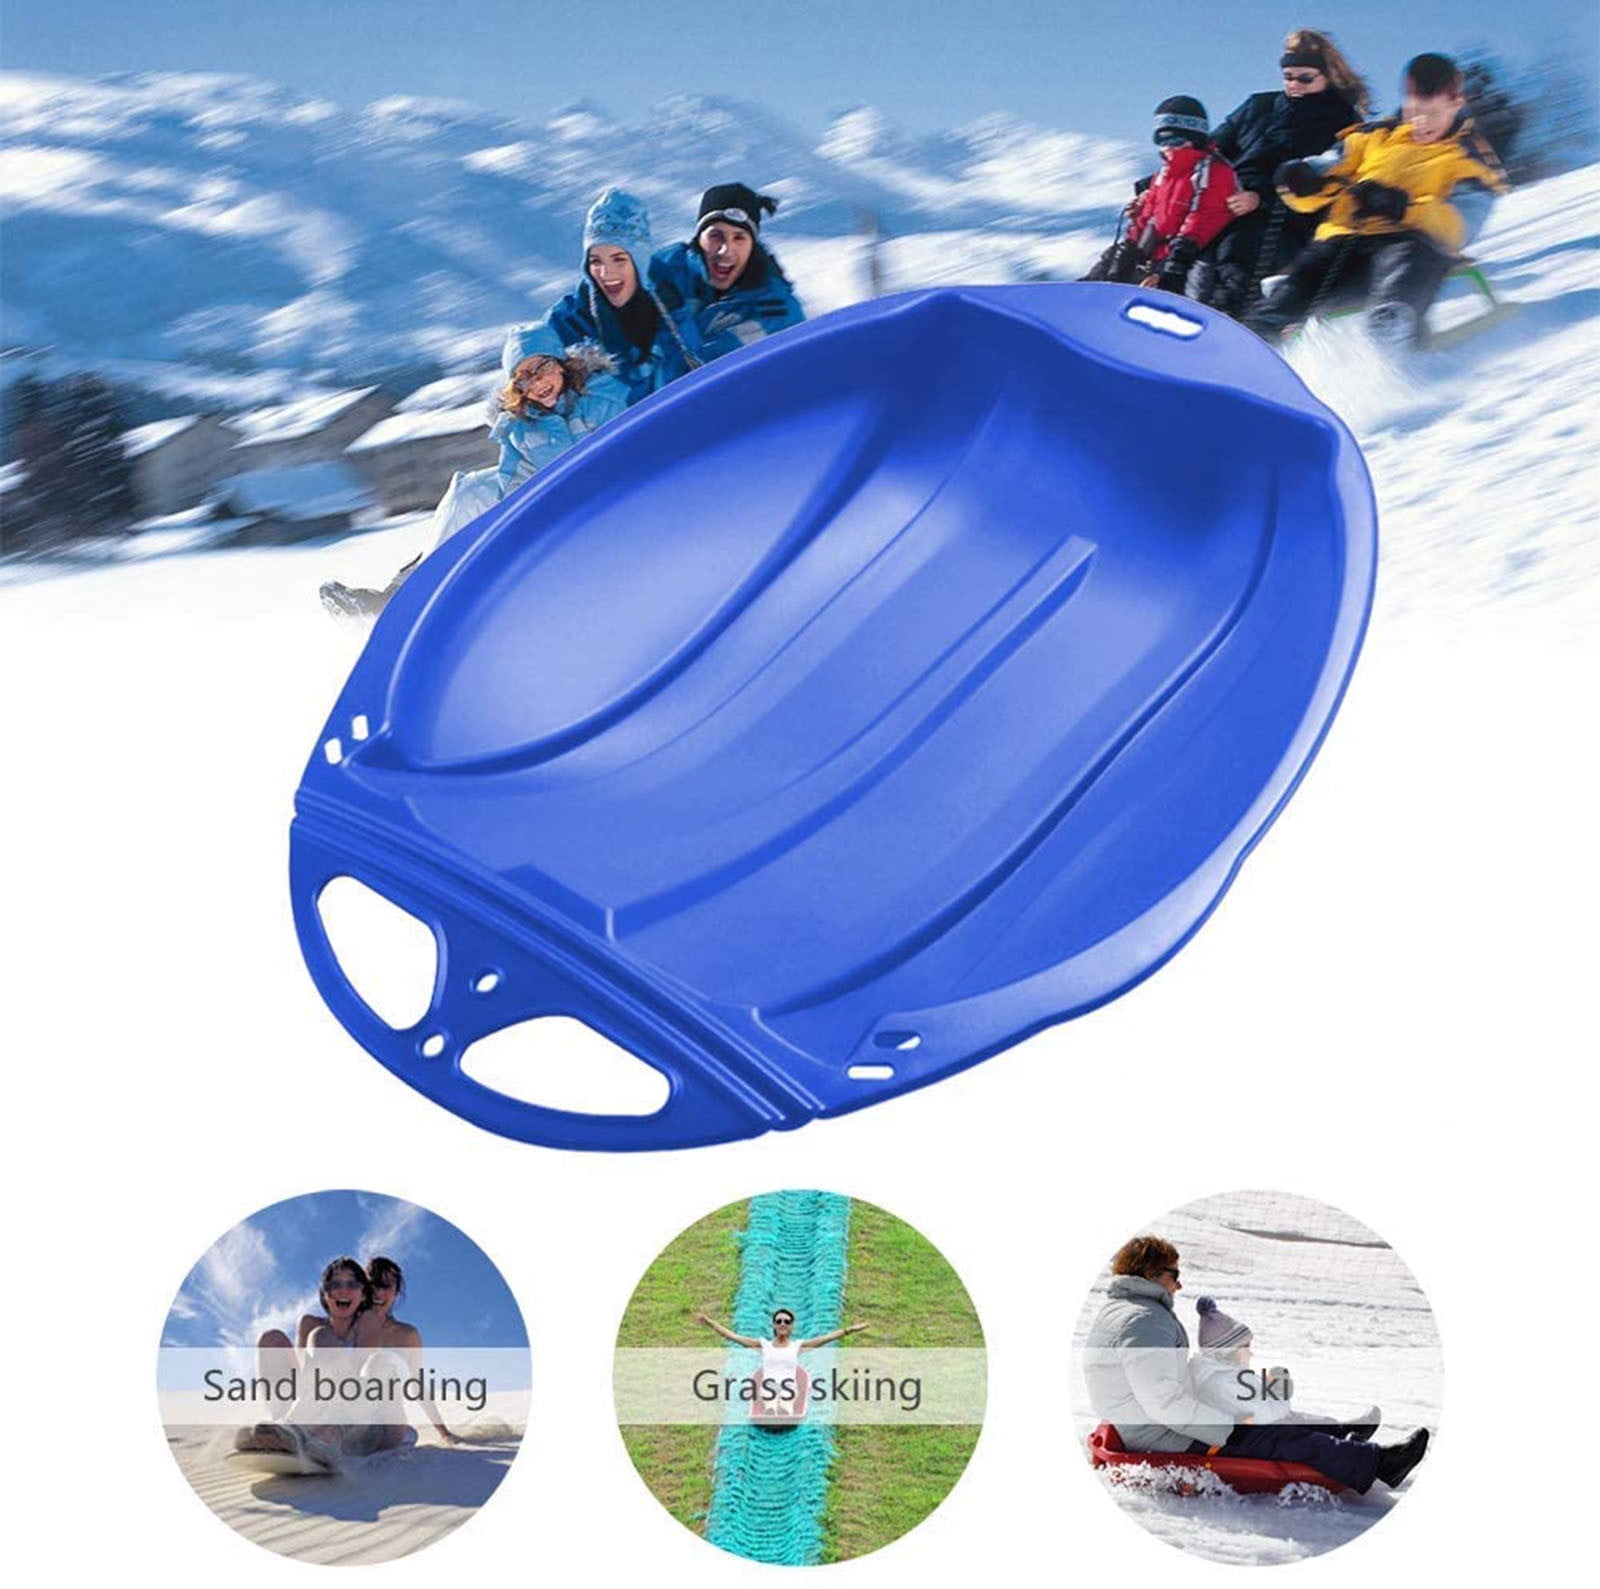 Sand Boarding 2021 Portable Skiing Snow Saucer Sled,Toboggan Downhill Pull Sled,Kids and Adult Round Sand Slider Disc Toy Snow Sled Ski Pad Board,Suitable for Skiing,Grass Sliding 